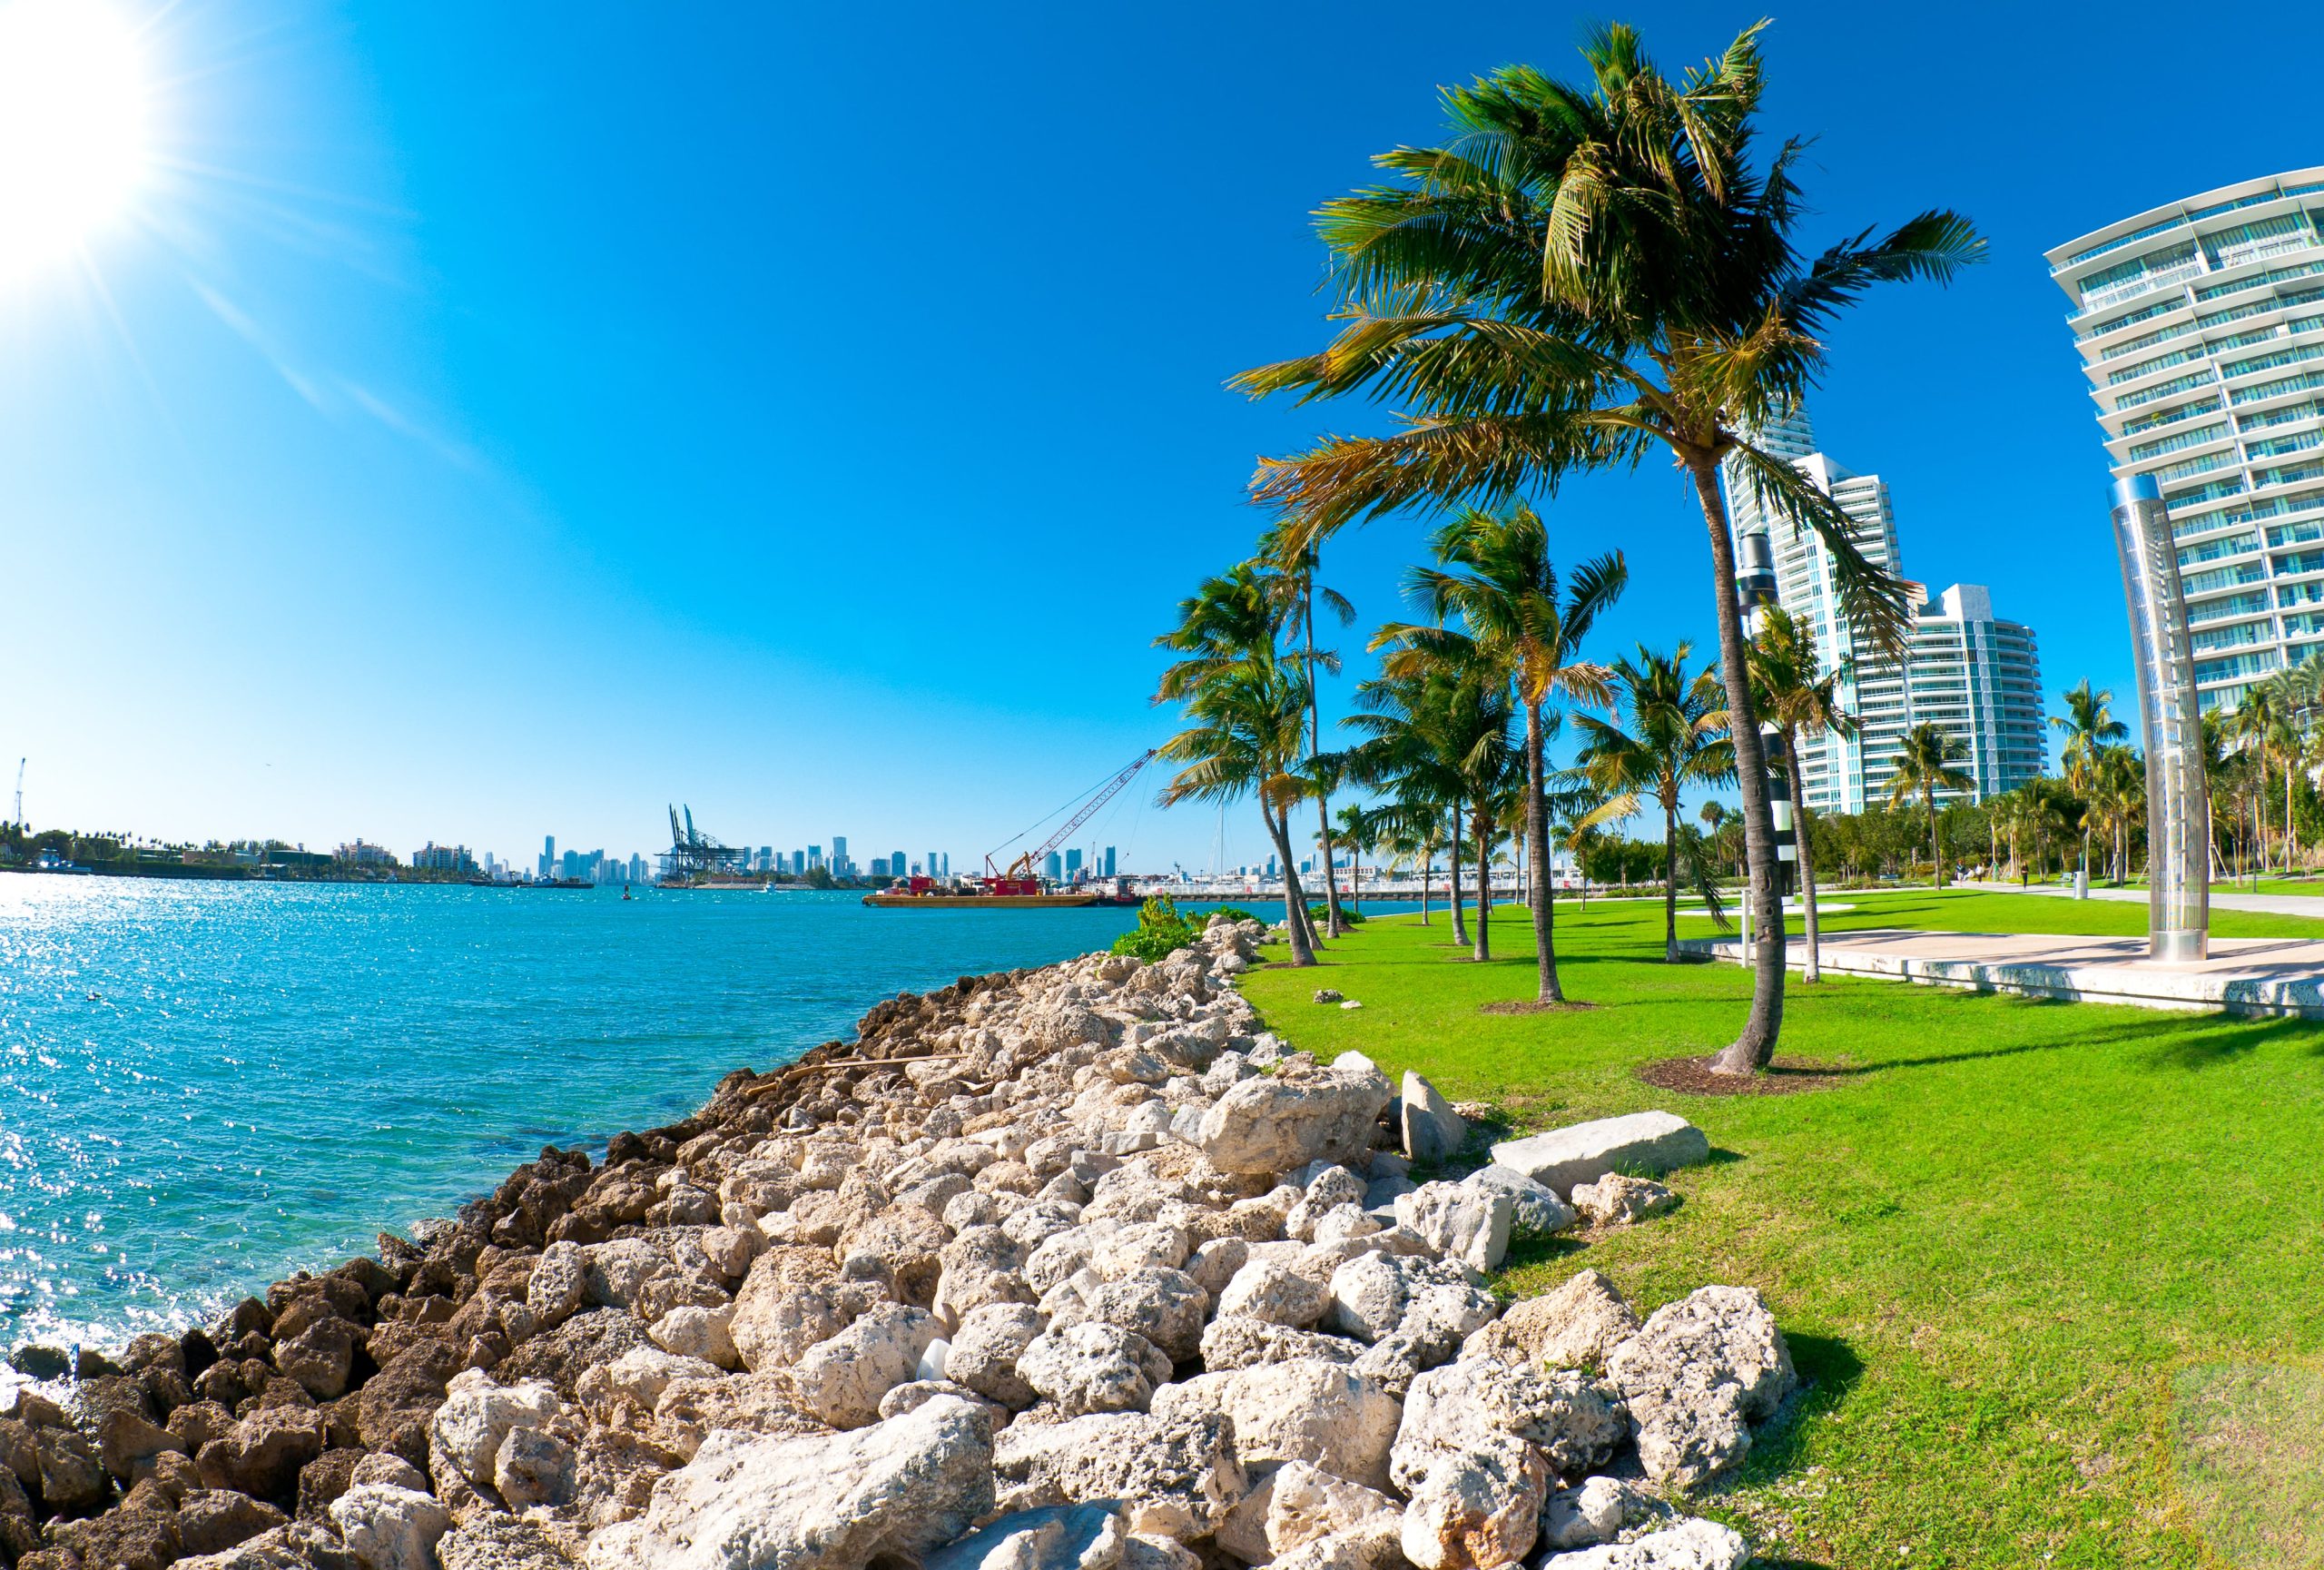 View of waterway used to enter Miami Seaport with city in the background and recreational park at the side